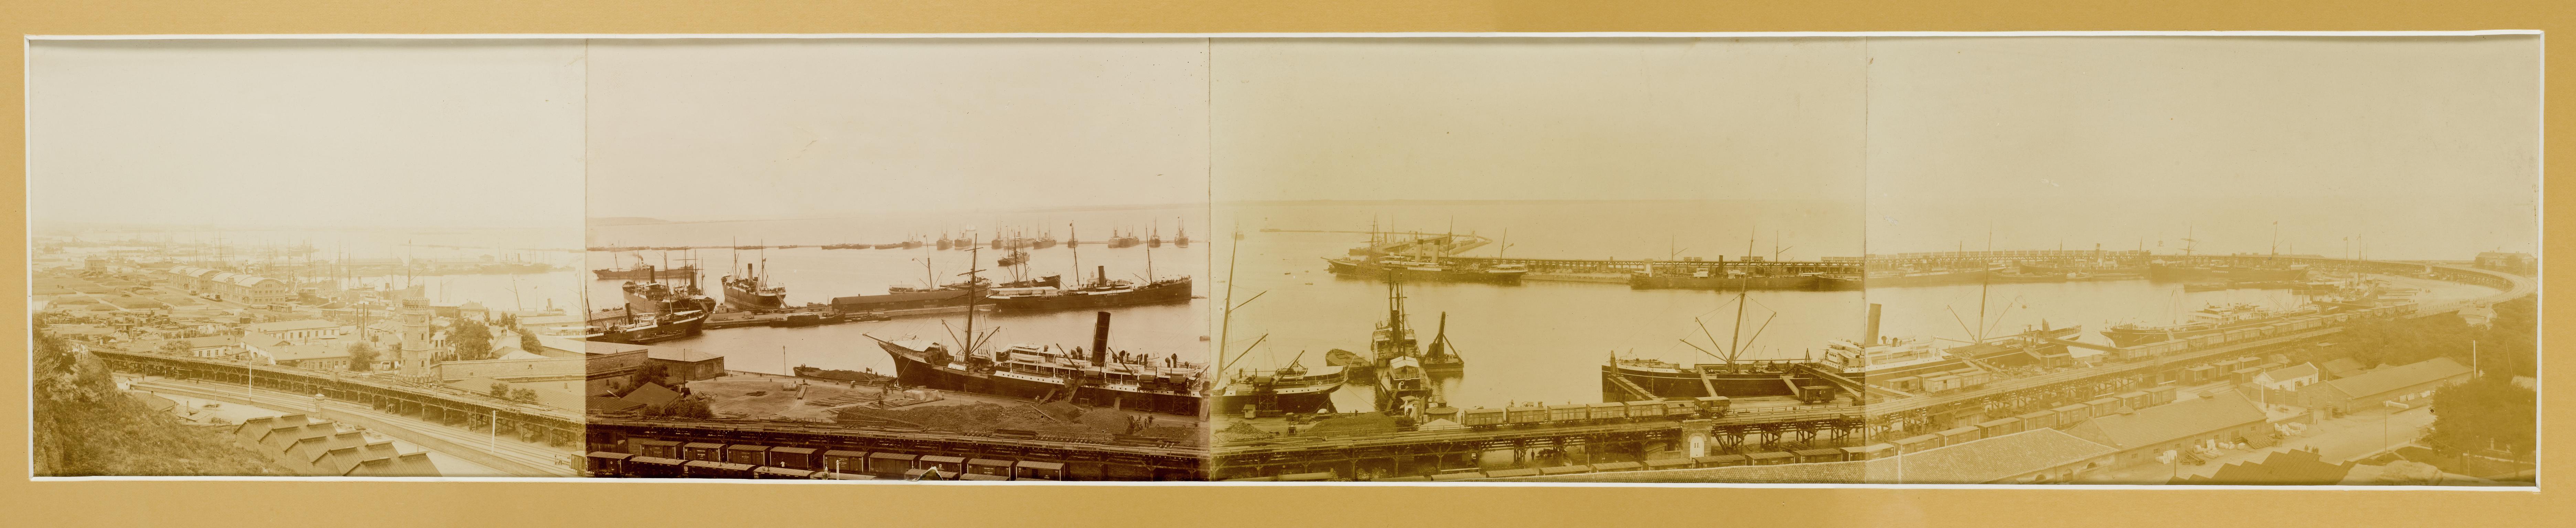 The Port of Odessa (photograph)